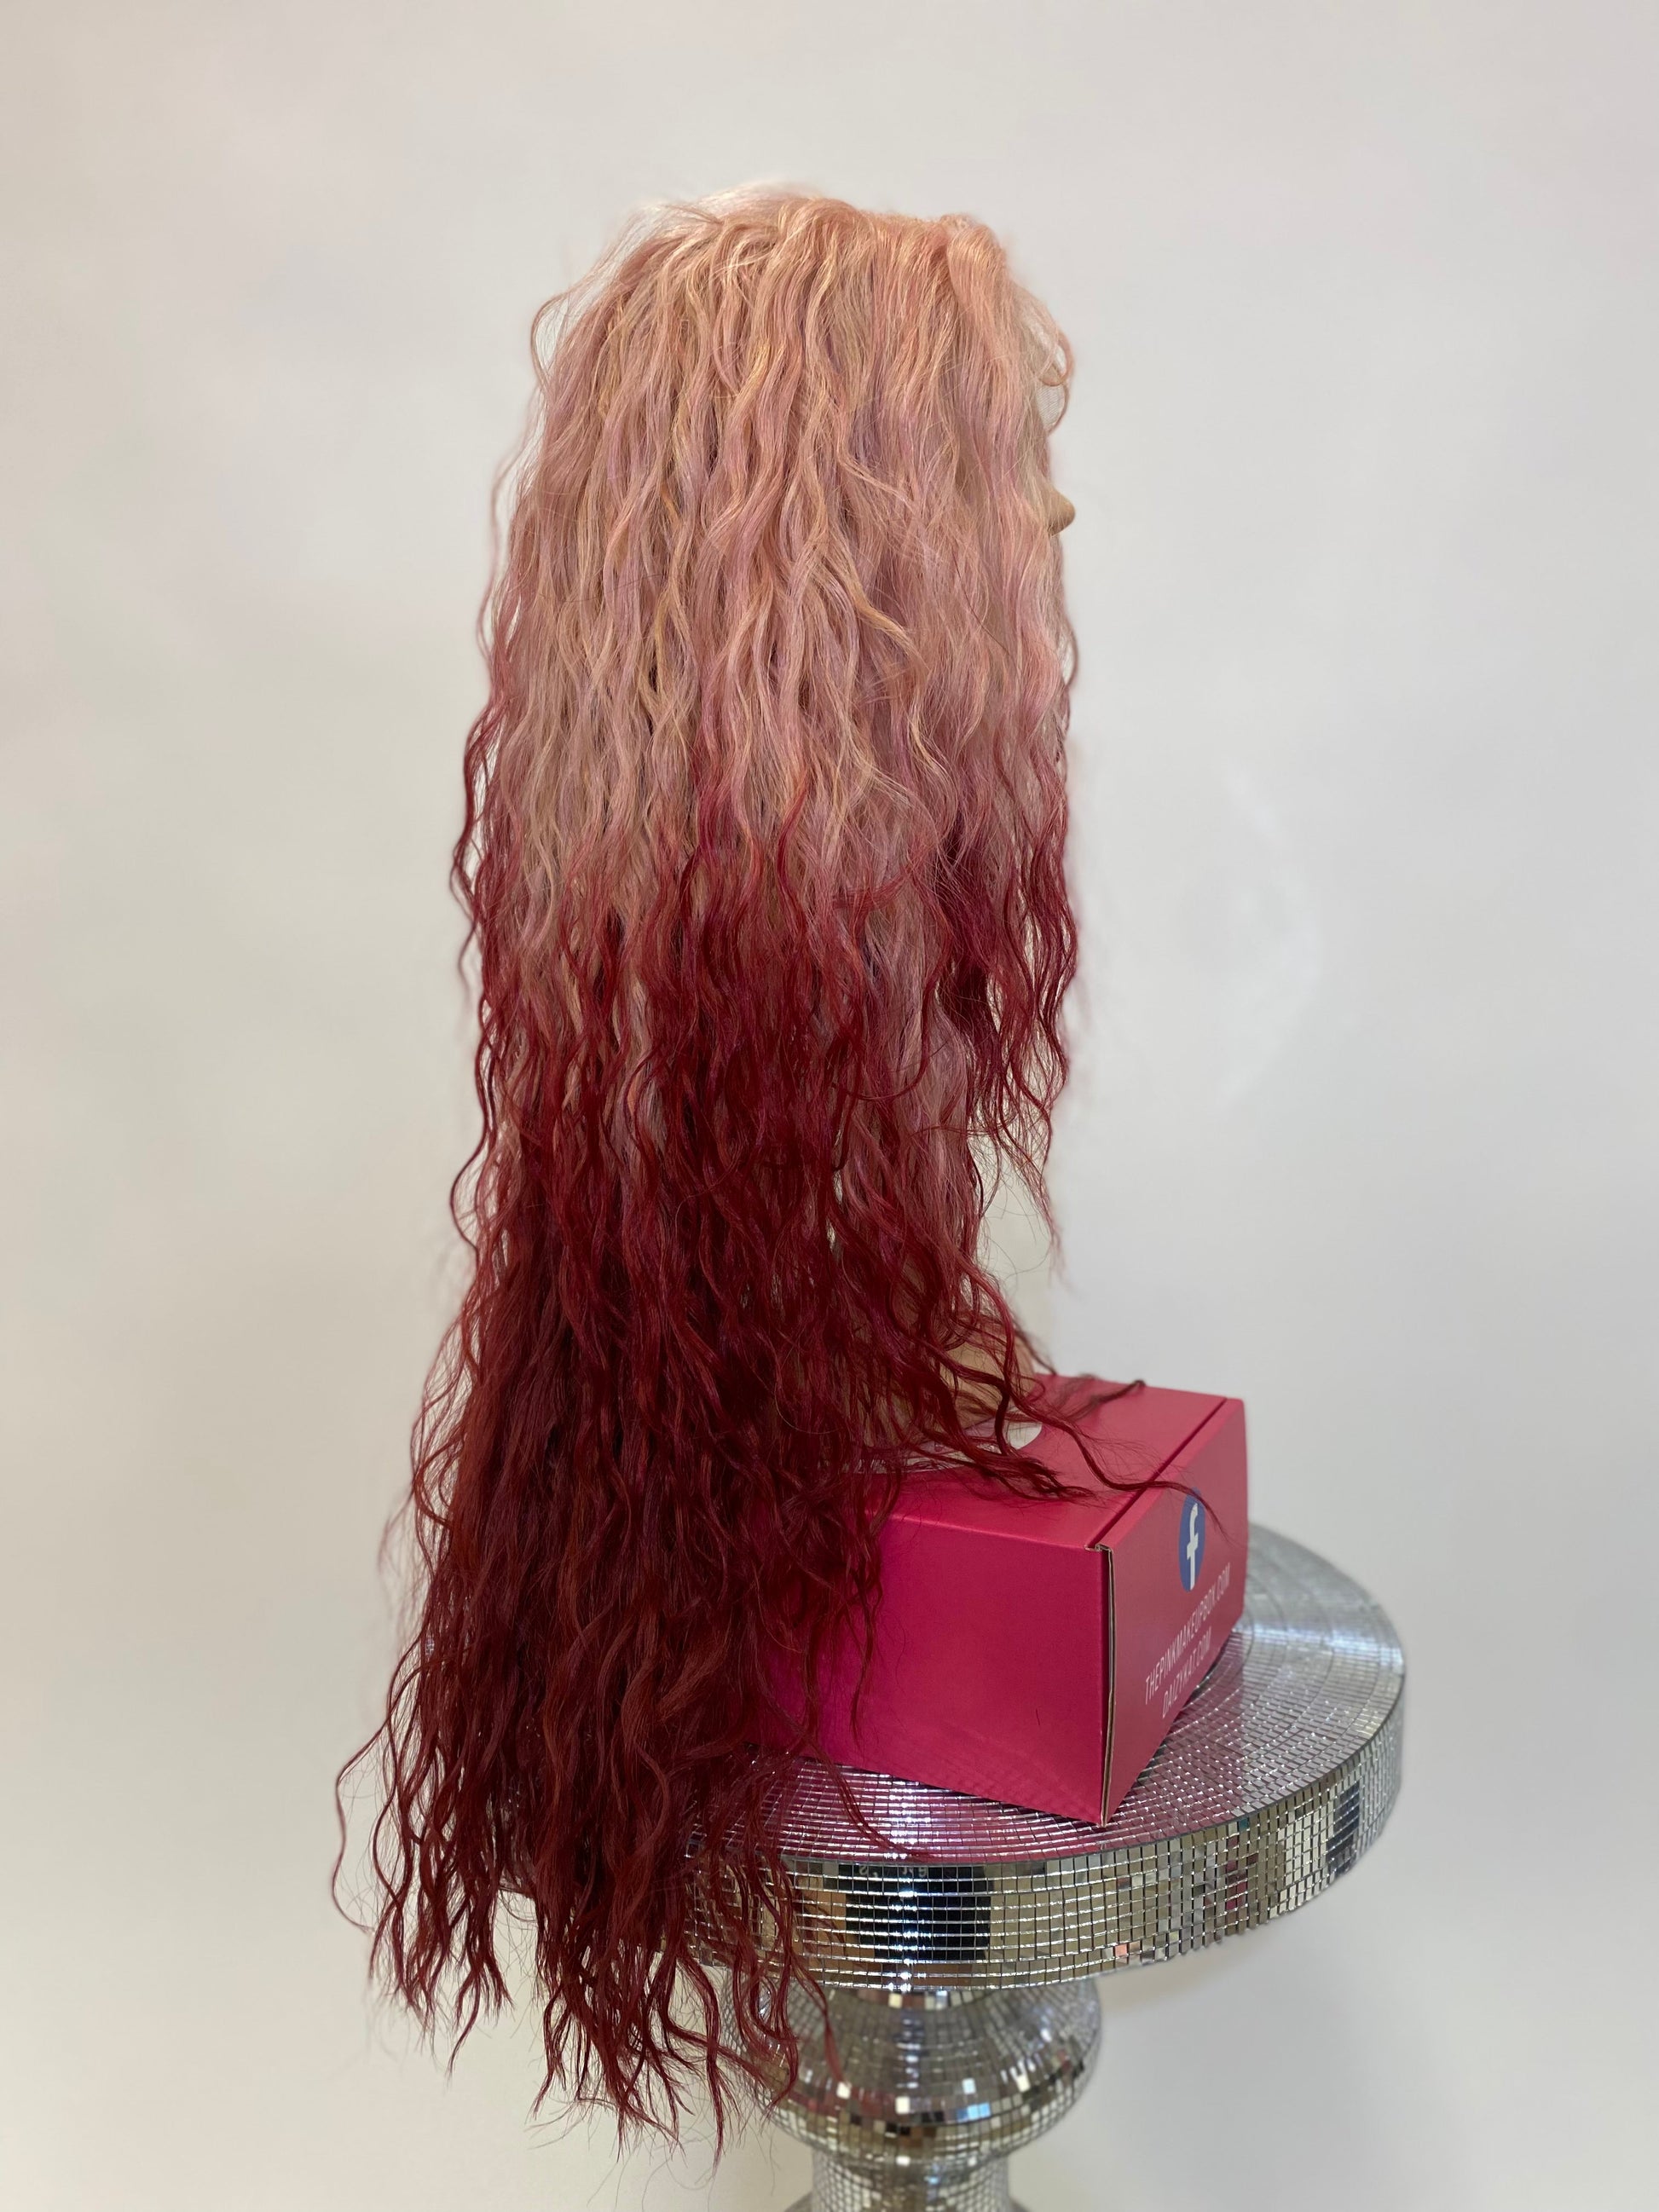 191 Erica- 13x4 Free Part Lace Front Wig - PINK TO RED - DaizyKat Cosmetics 191 Erica- 13x4 Free Part Lace Front Wig - PINK TO RED DaizyKat Cosmetics Wigs